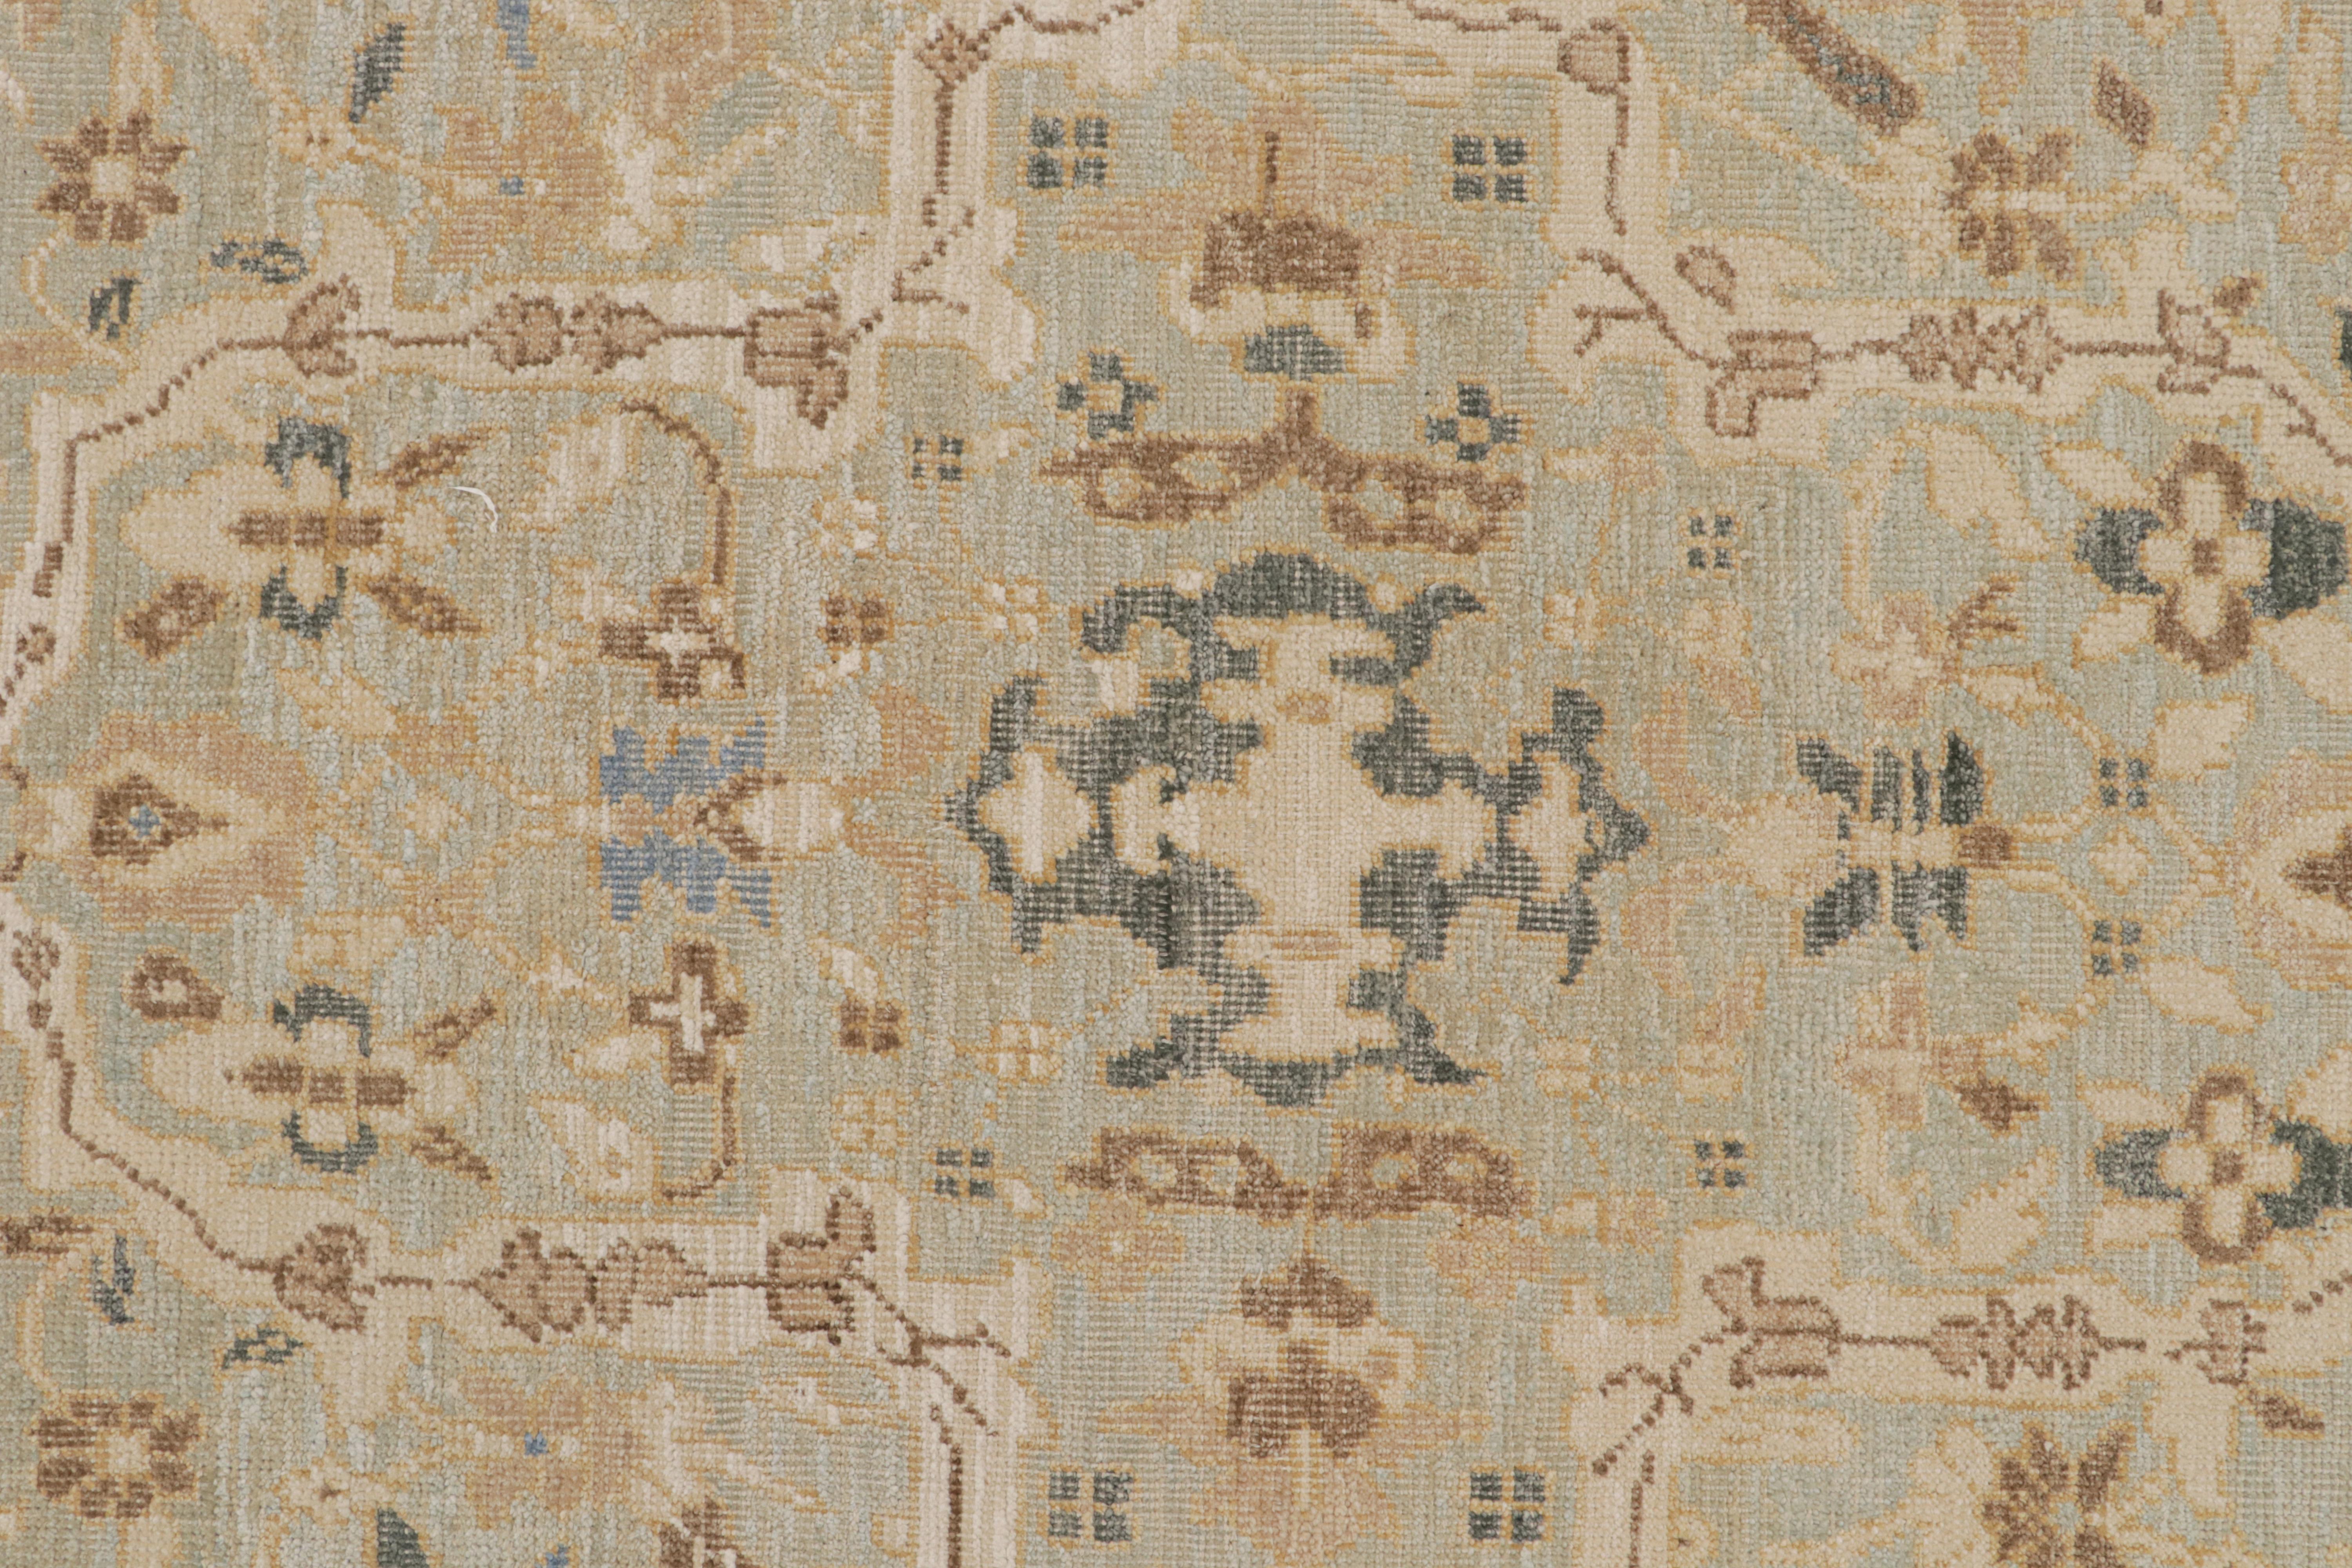 Contemporary Rug & Kilim’s Oushak Style Rug in Blue and Beige-Brown Floral Patterns For Sale